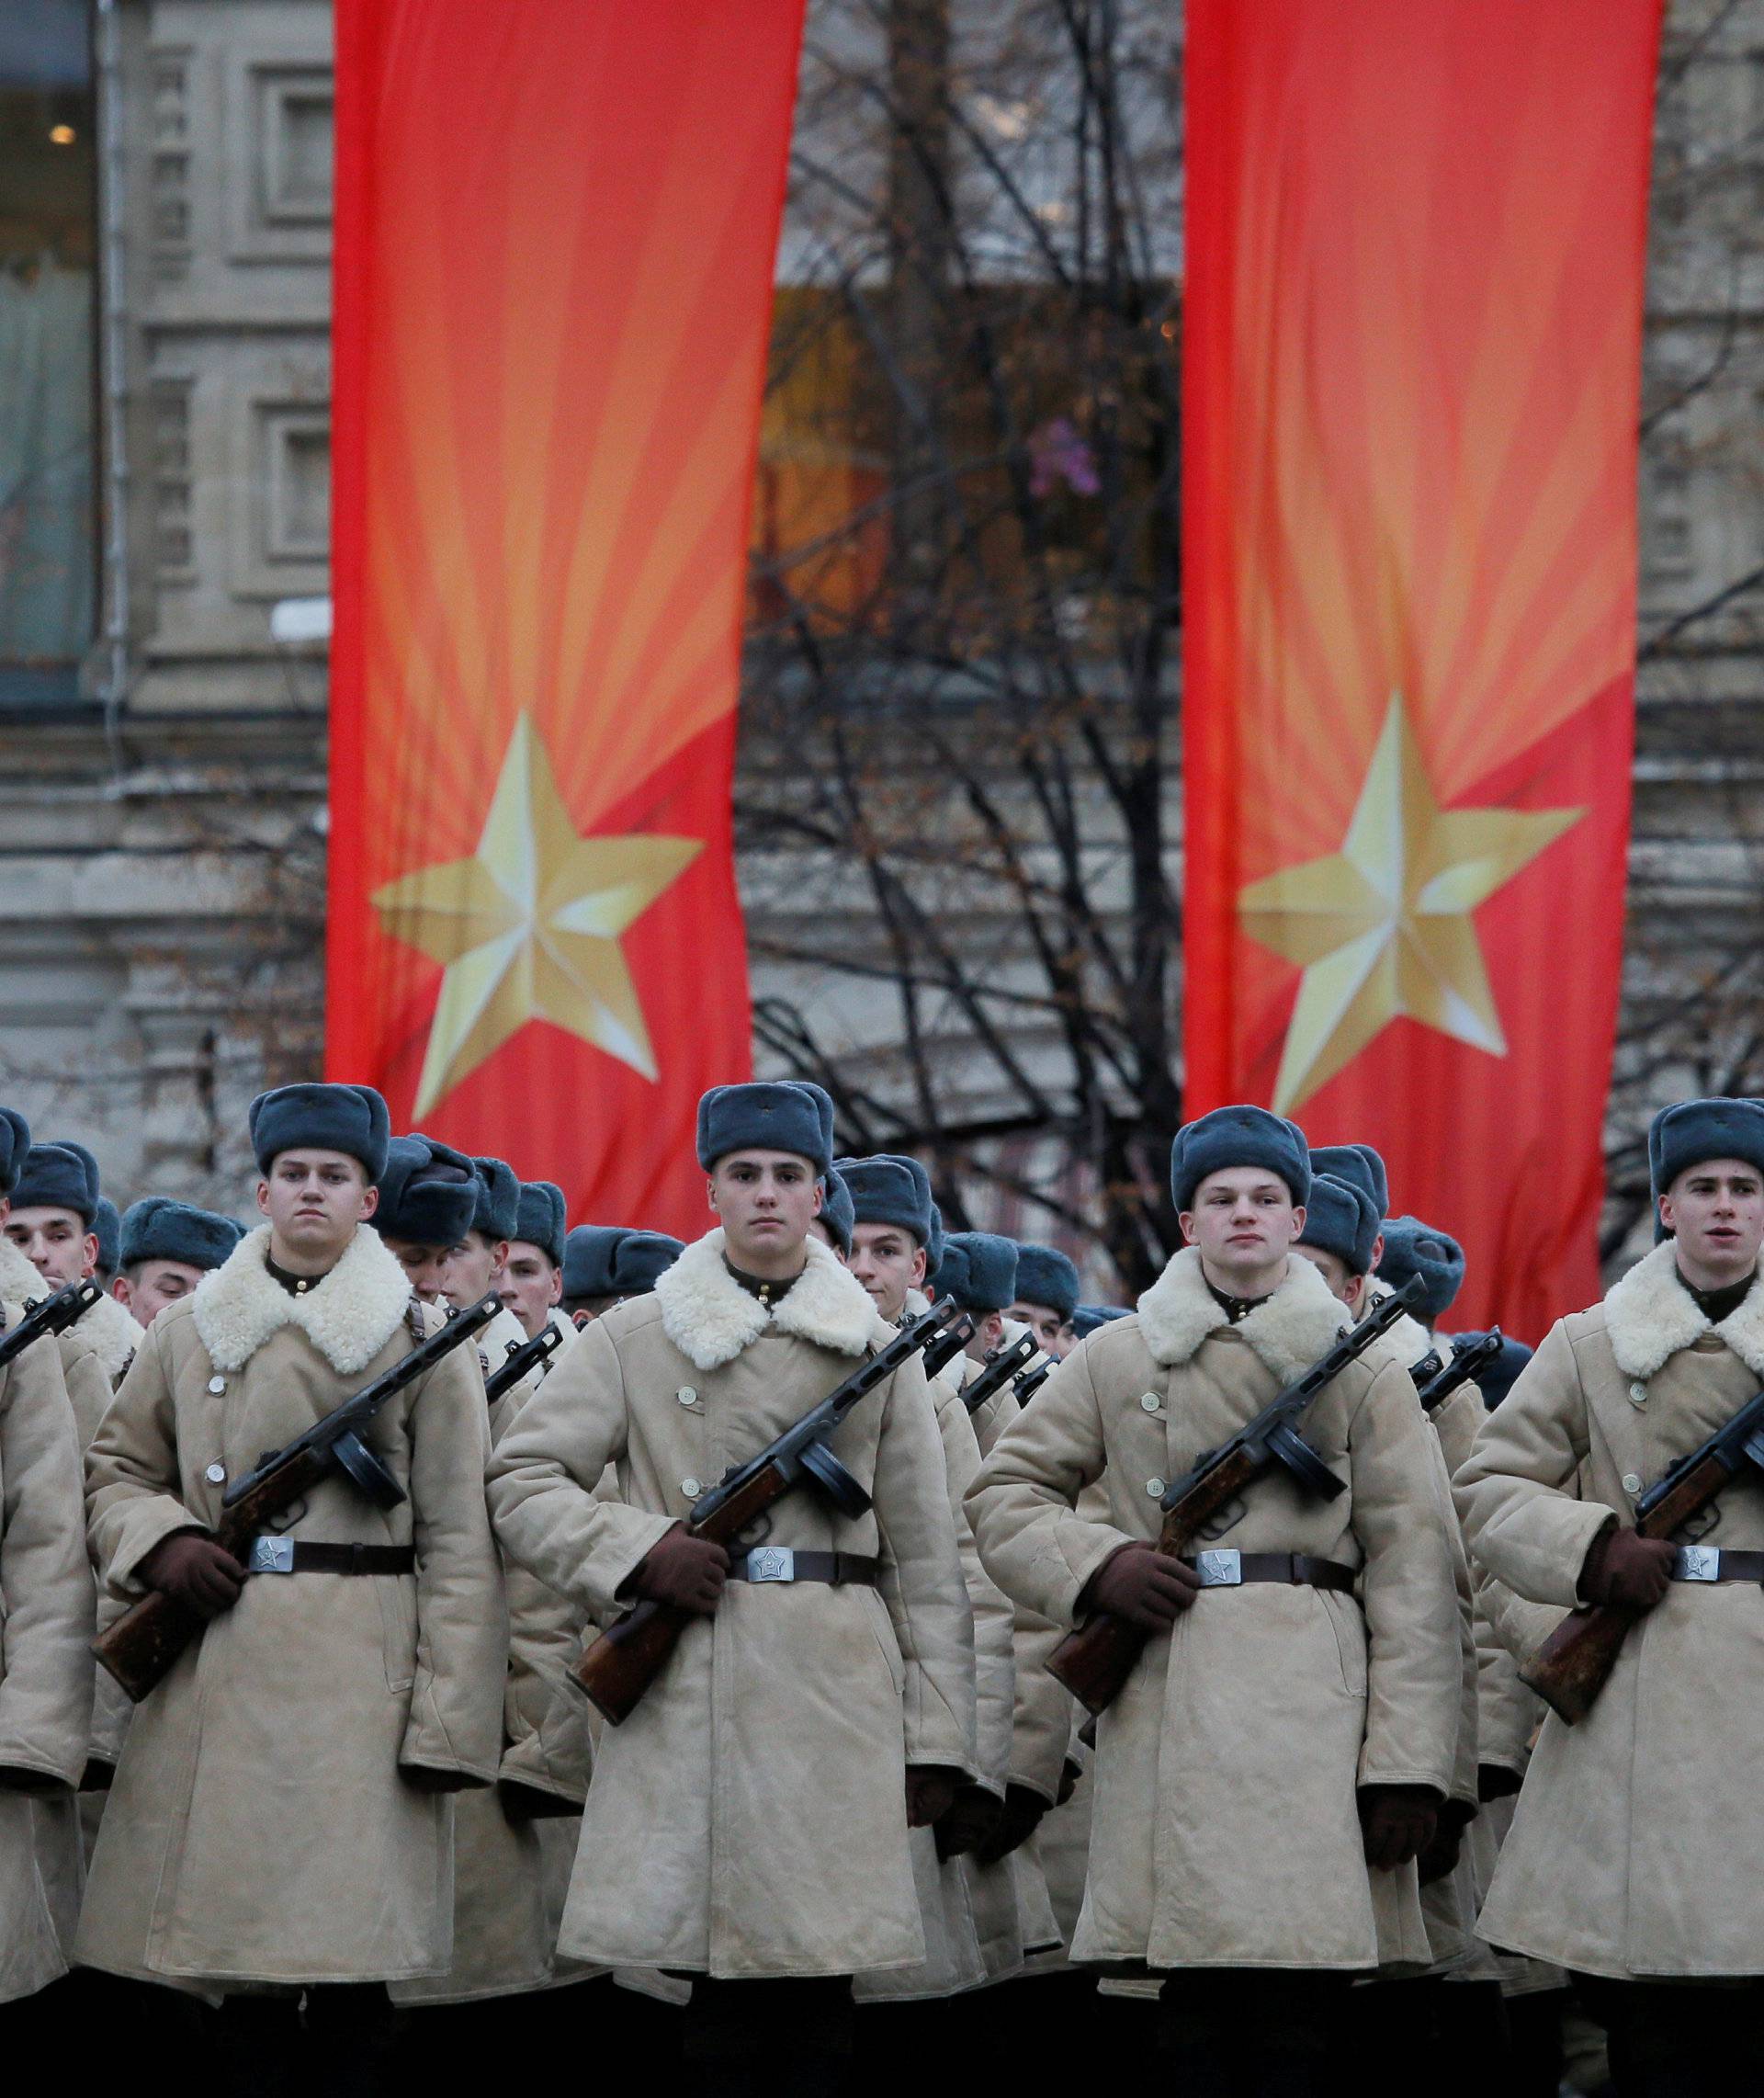 Russian servicemen dressed in historical uniforms wait before a military parade marking the anniversary of the 1941 parade, when Soviet soldiers marched towards the front lines of World War Two, at Red Square in Moscow